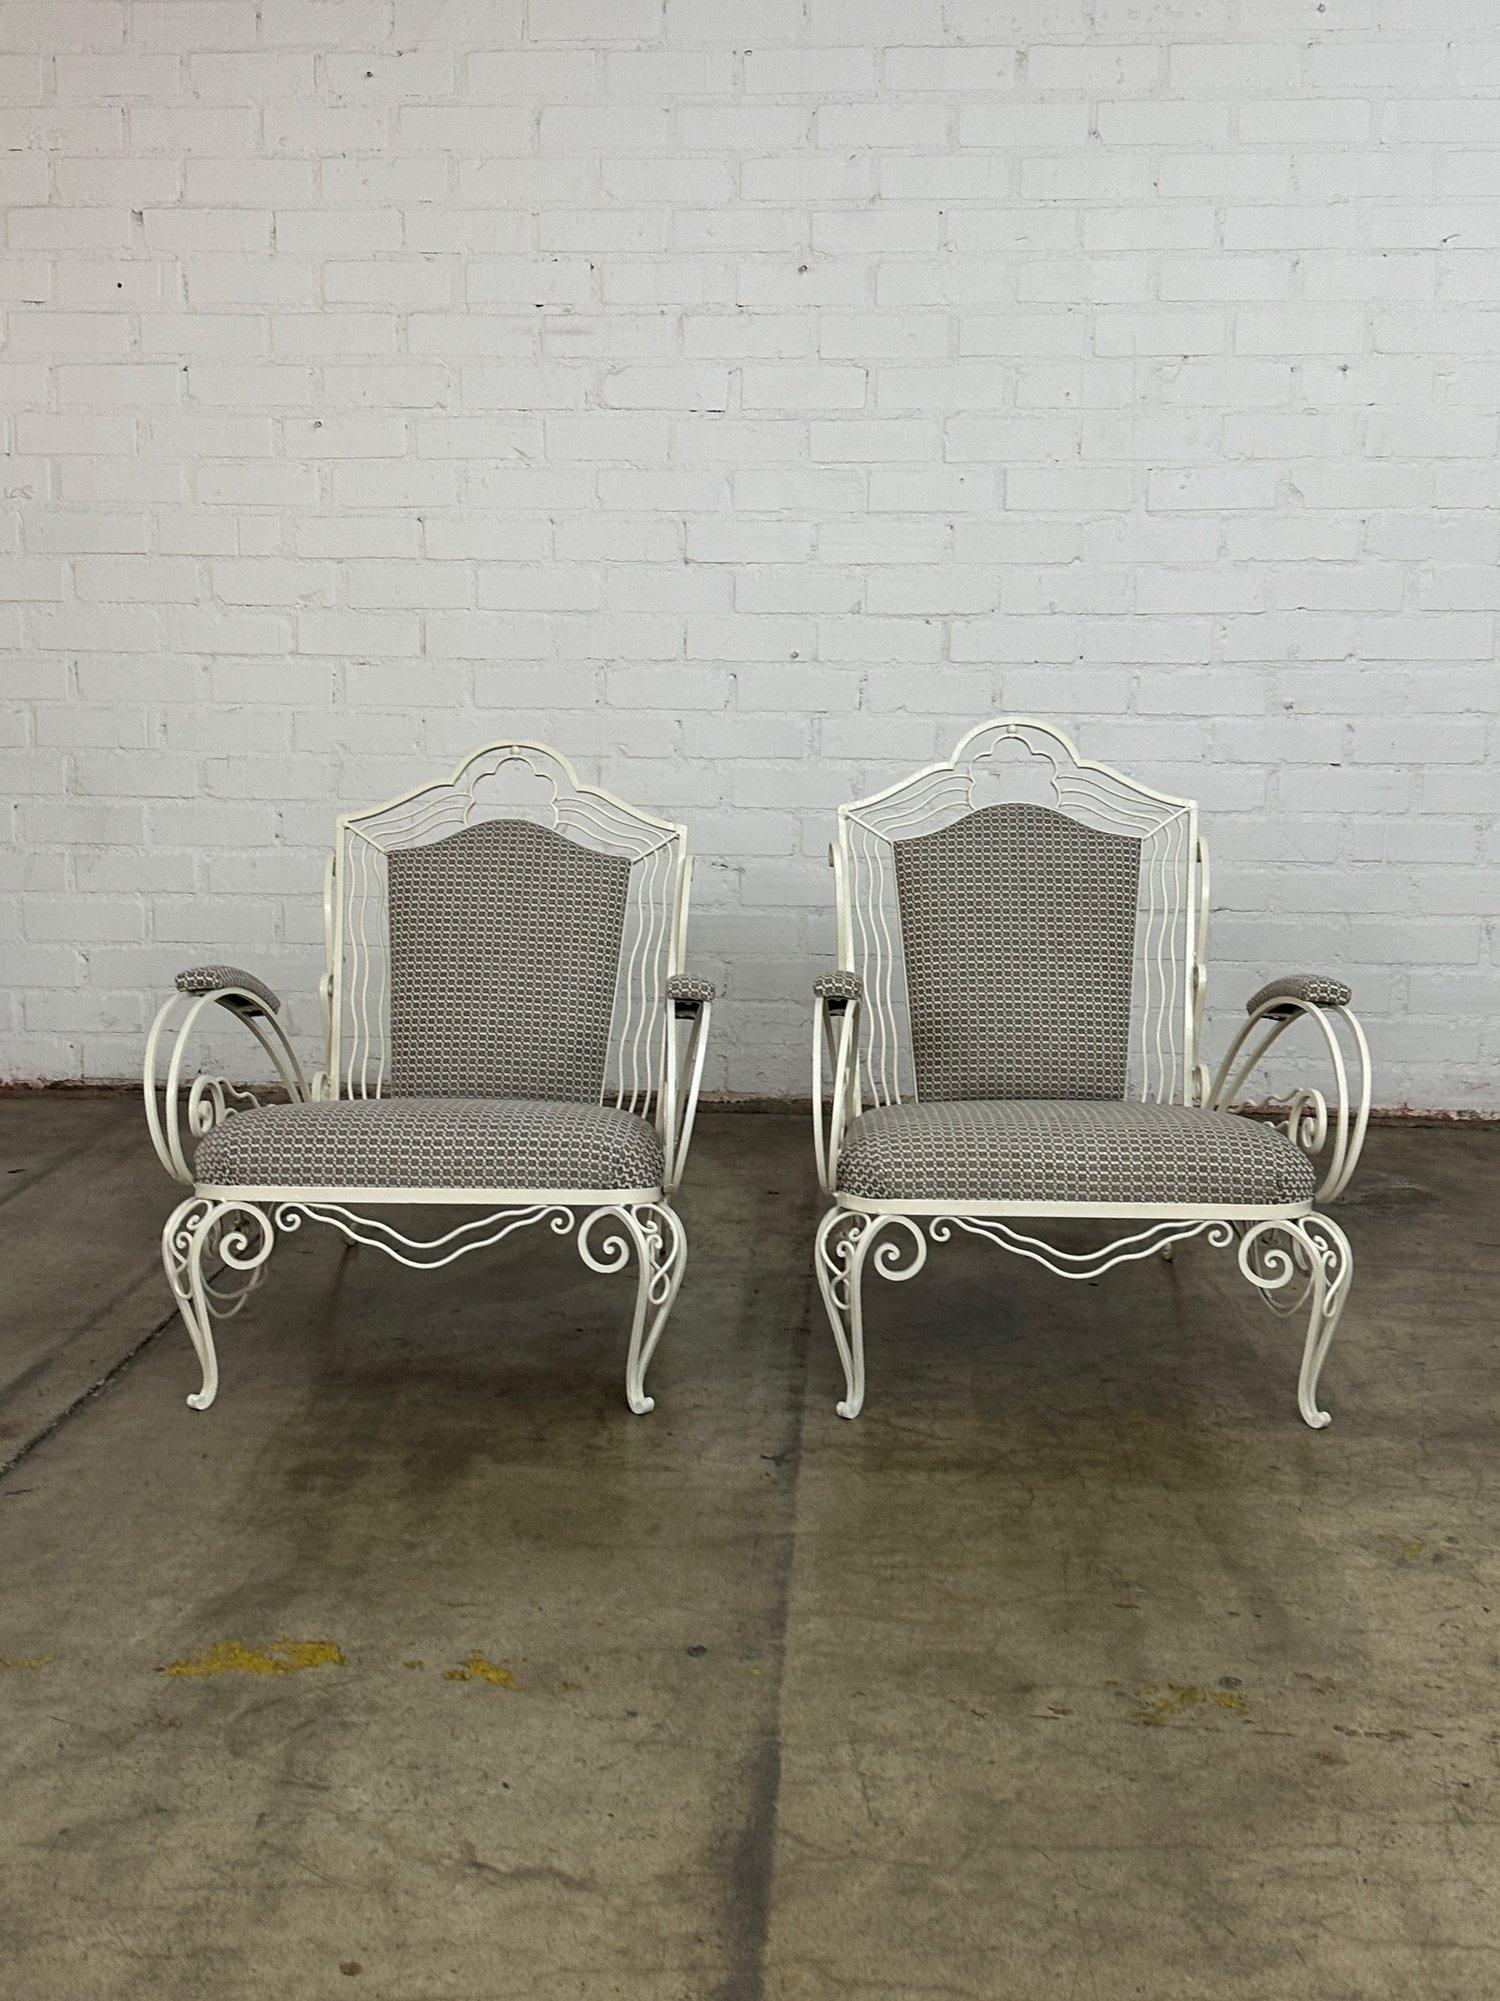 Restored French Iron chairs - Pair For Sale 9